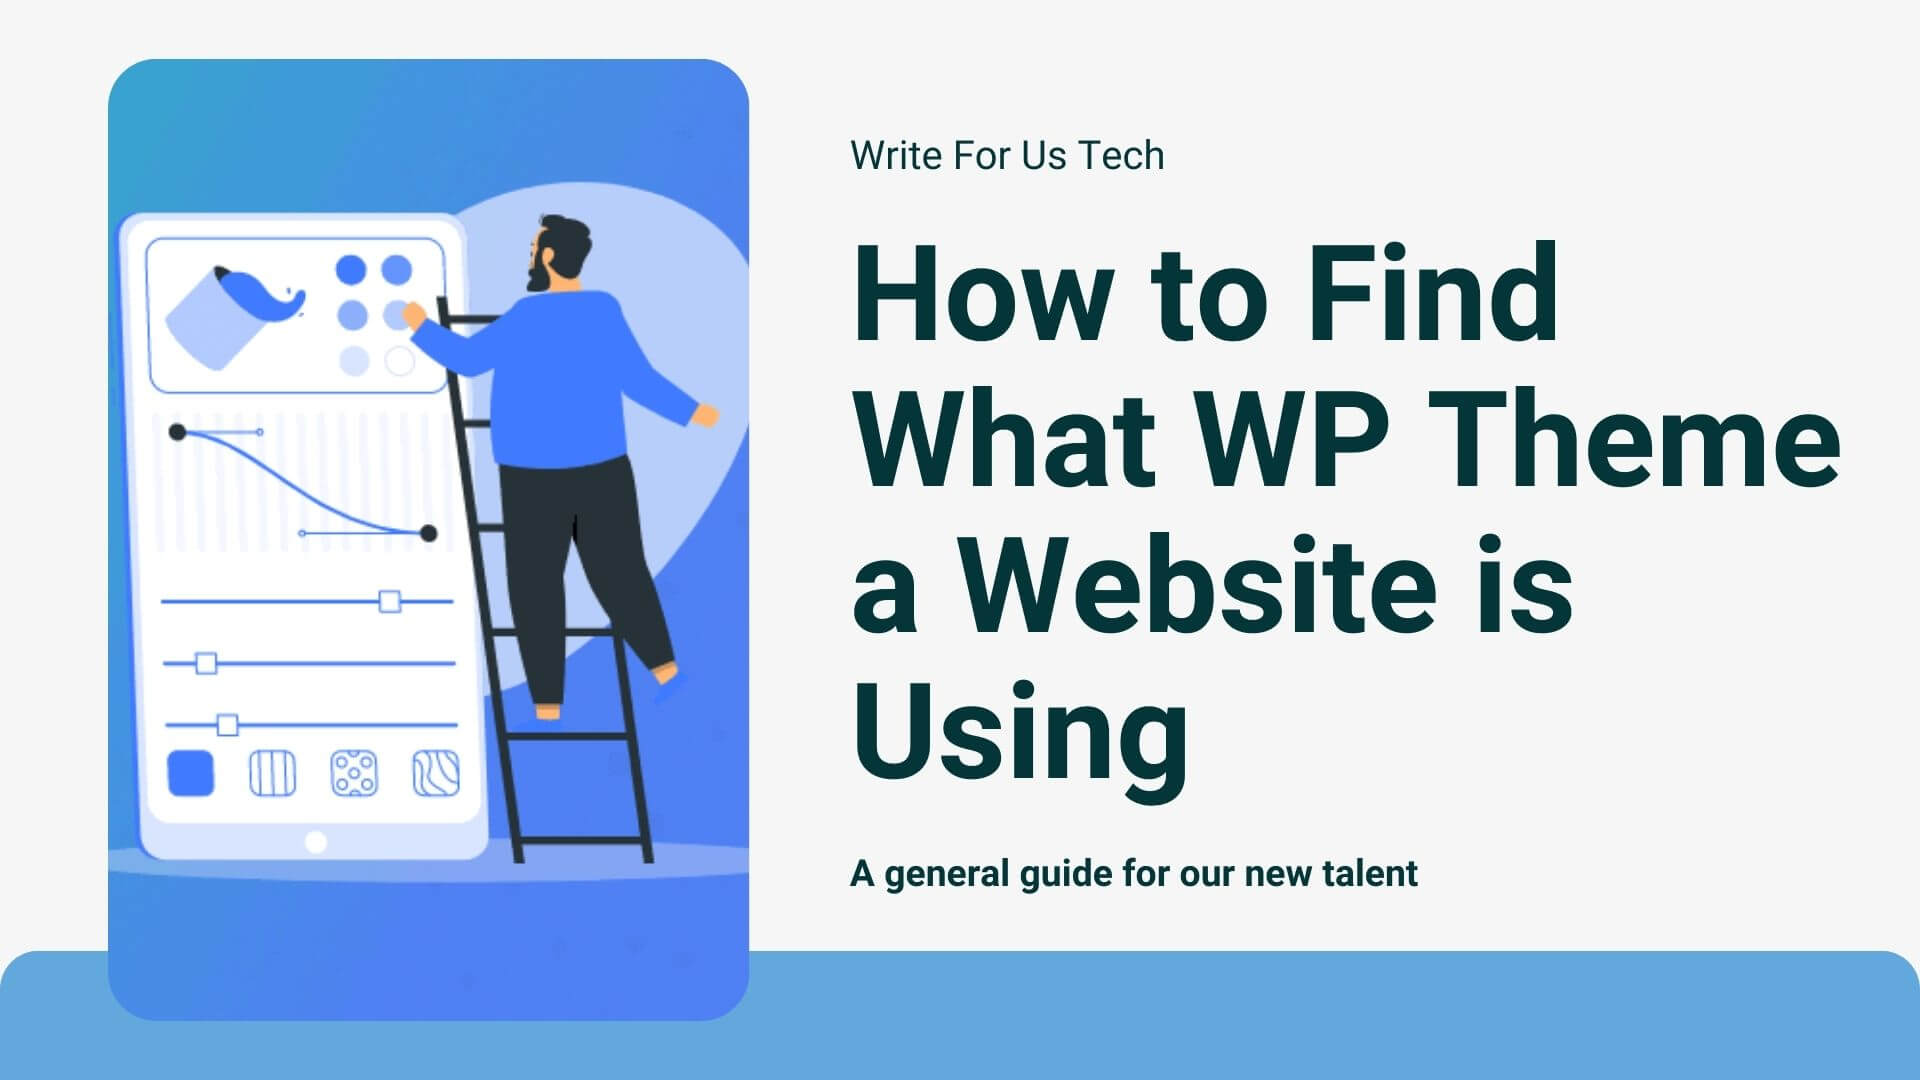 How to Find What WP Theme a Website is Using (1)